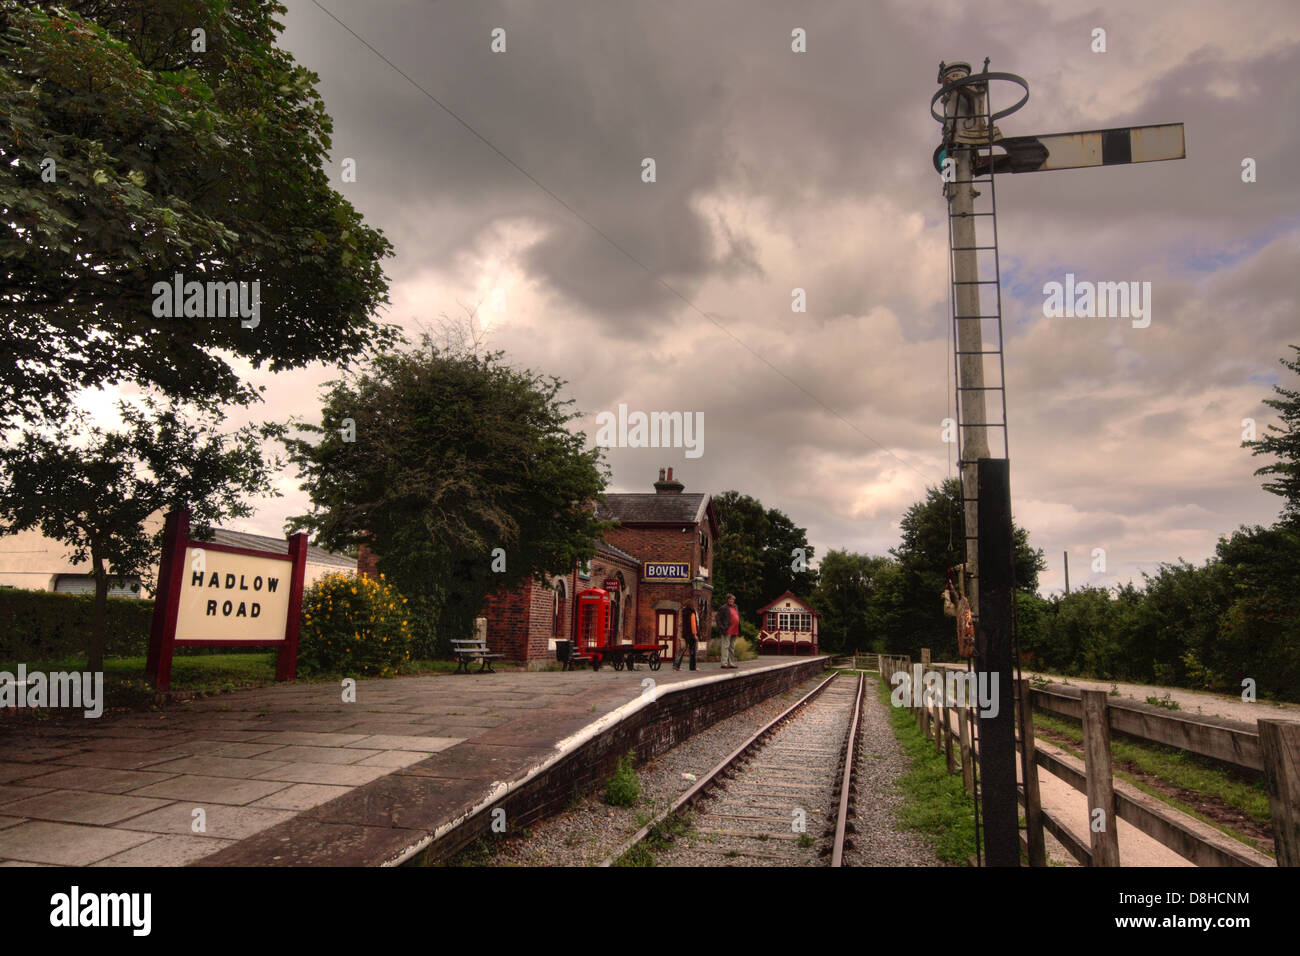 Hadlow road historic preserved railway station, with signal on the Wirral Way, Merseyside, England, UK Stock Photo